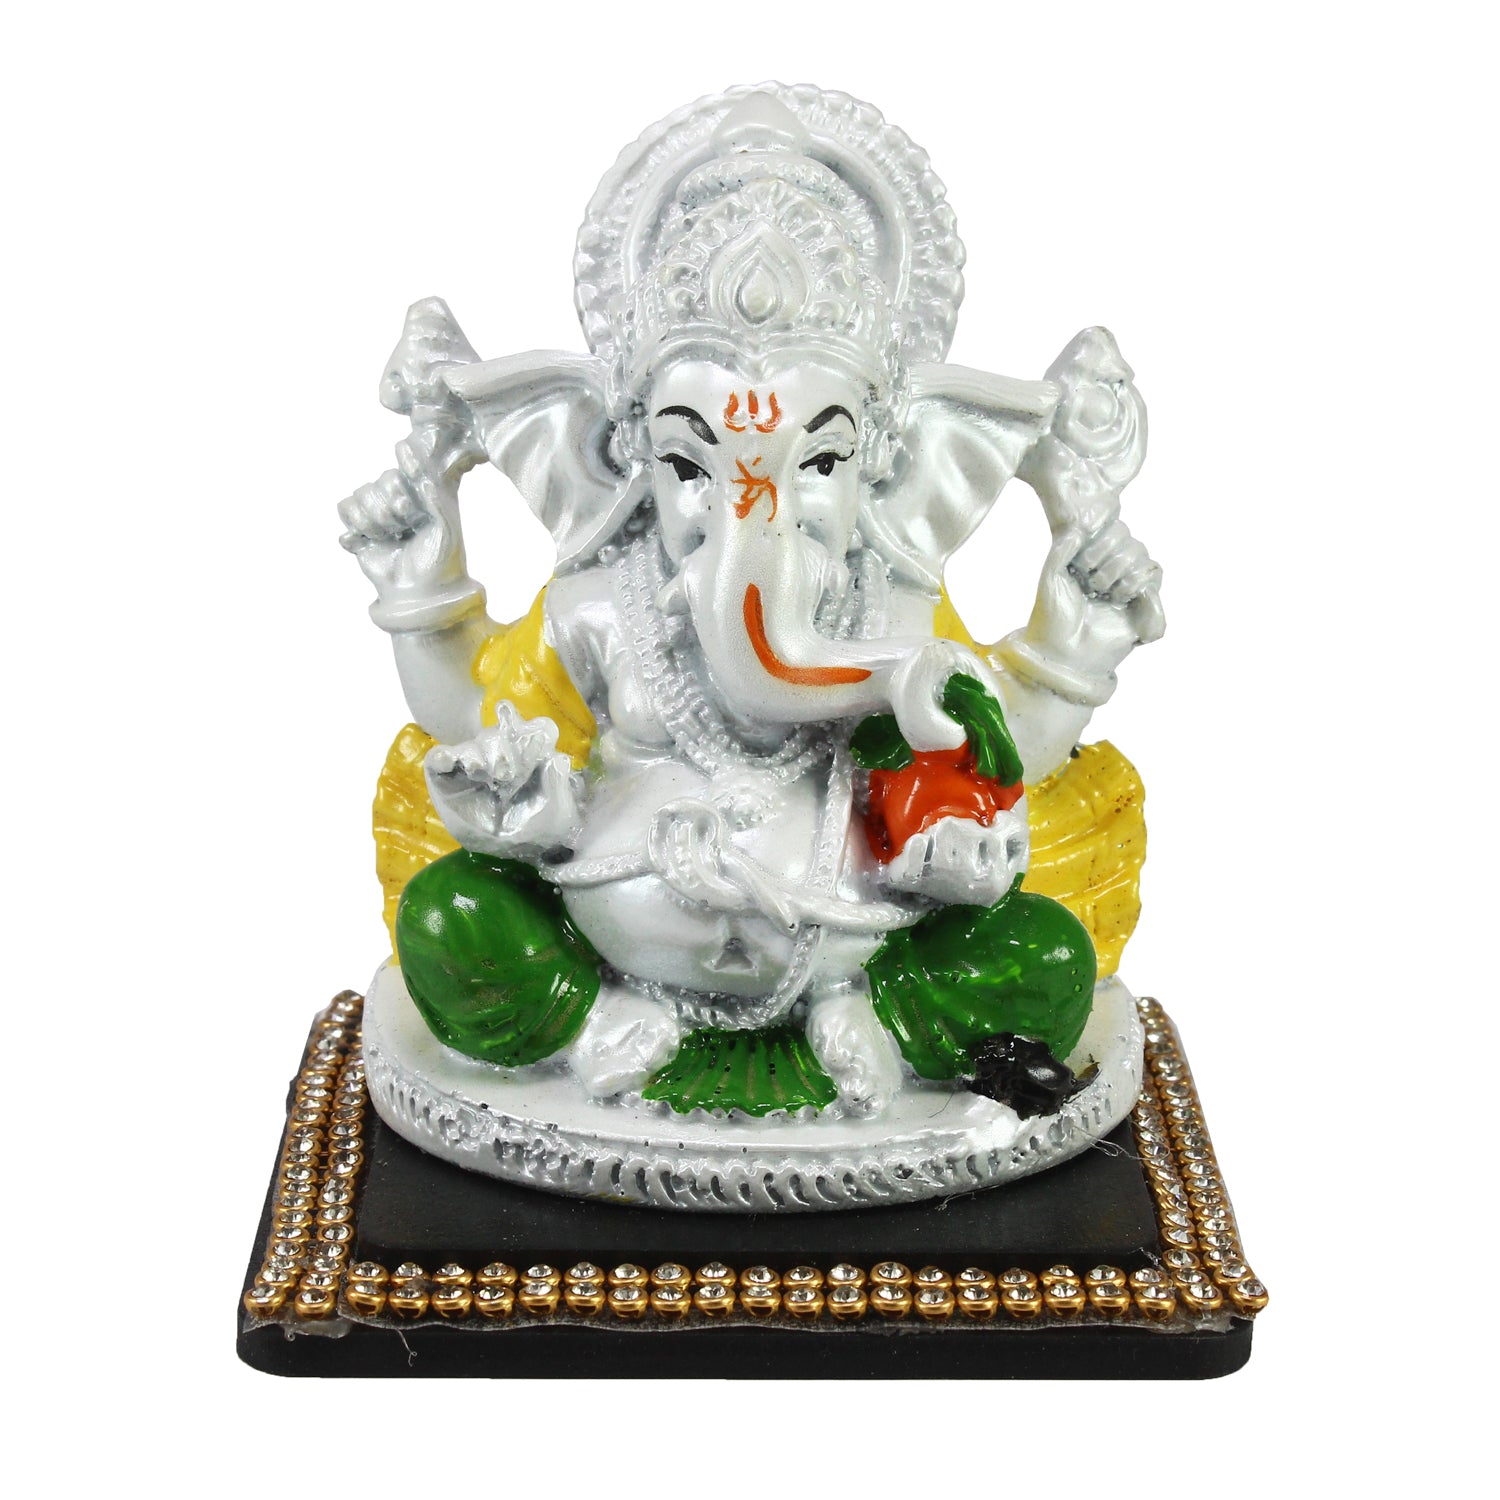 Decorative Lord Ganesha Showpiece for Car Dashboard, Home Temple and Office Desks 1